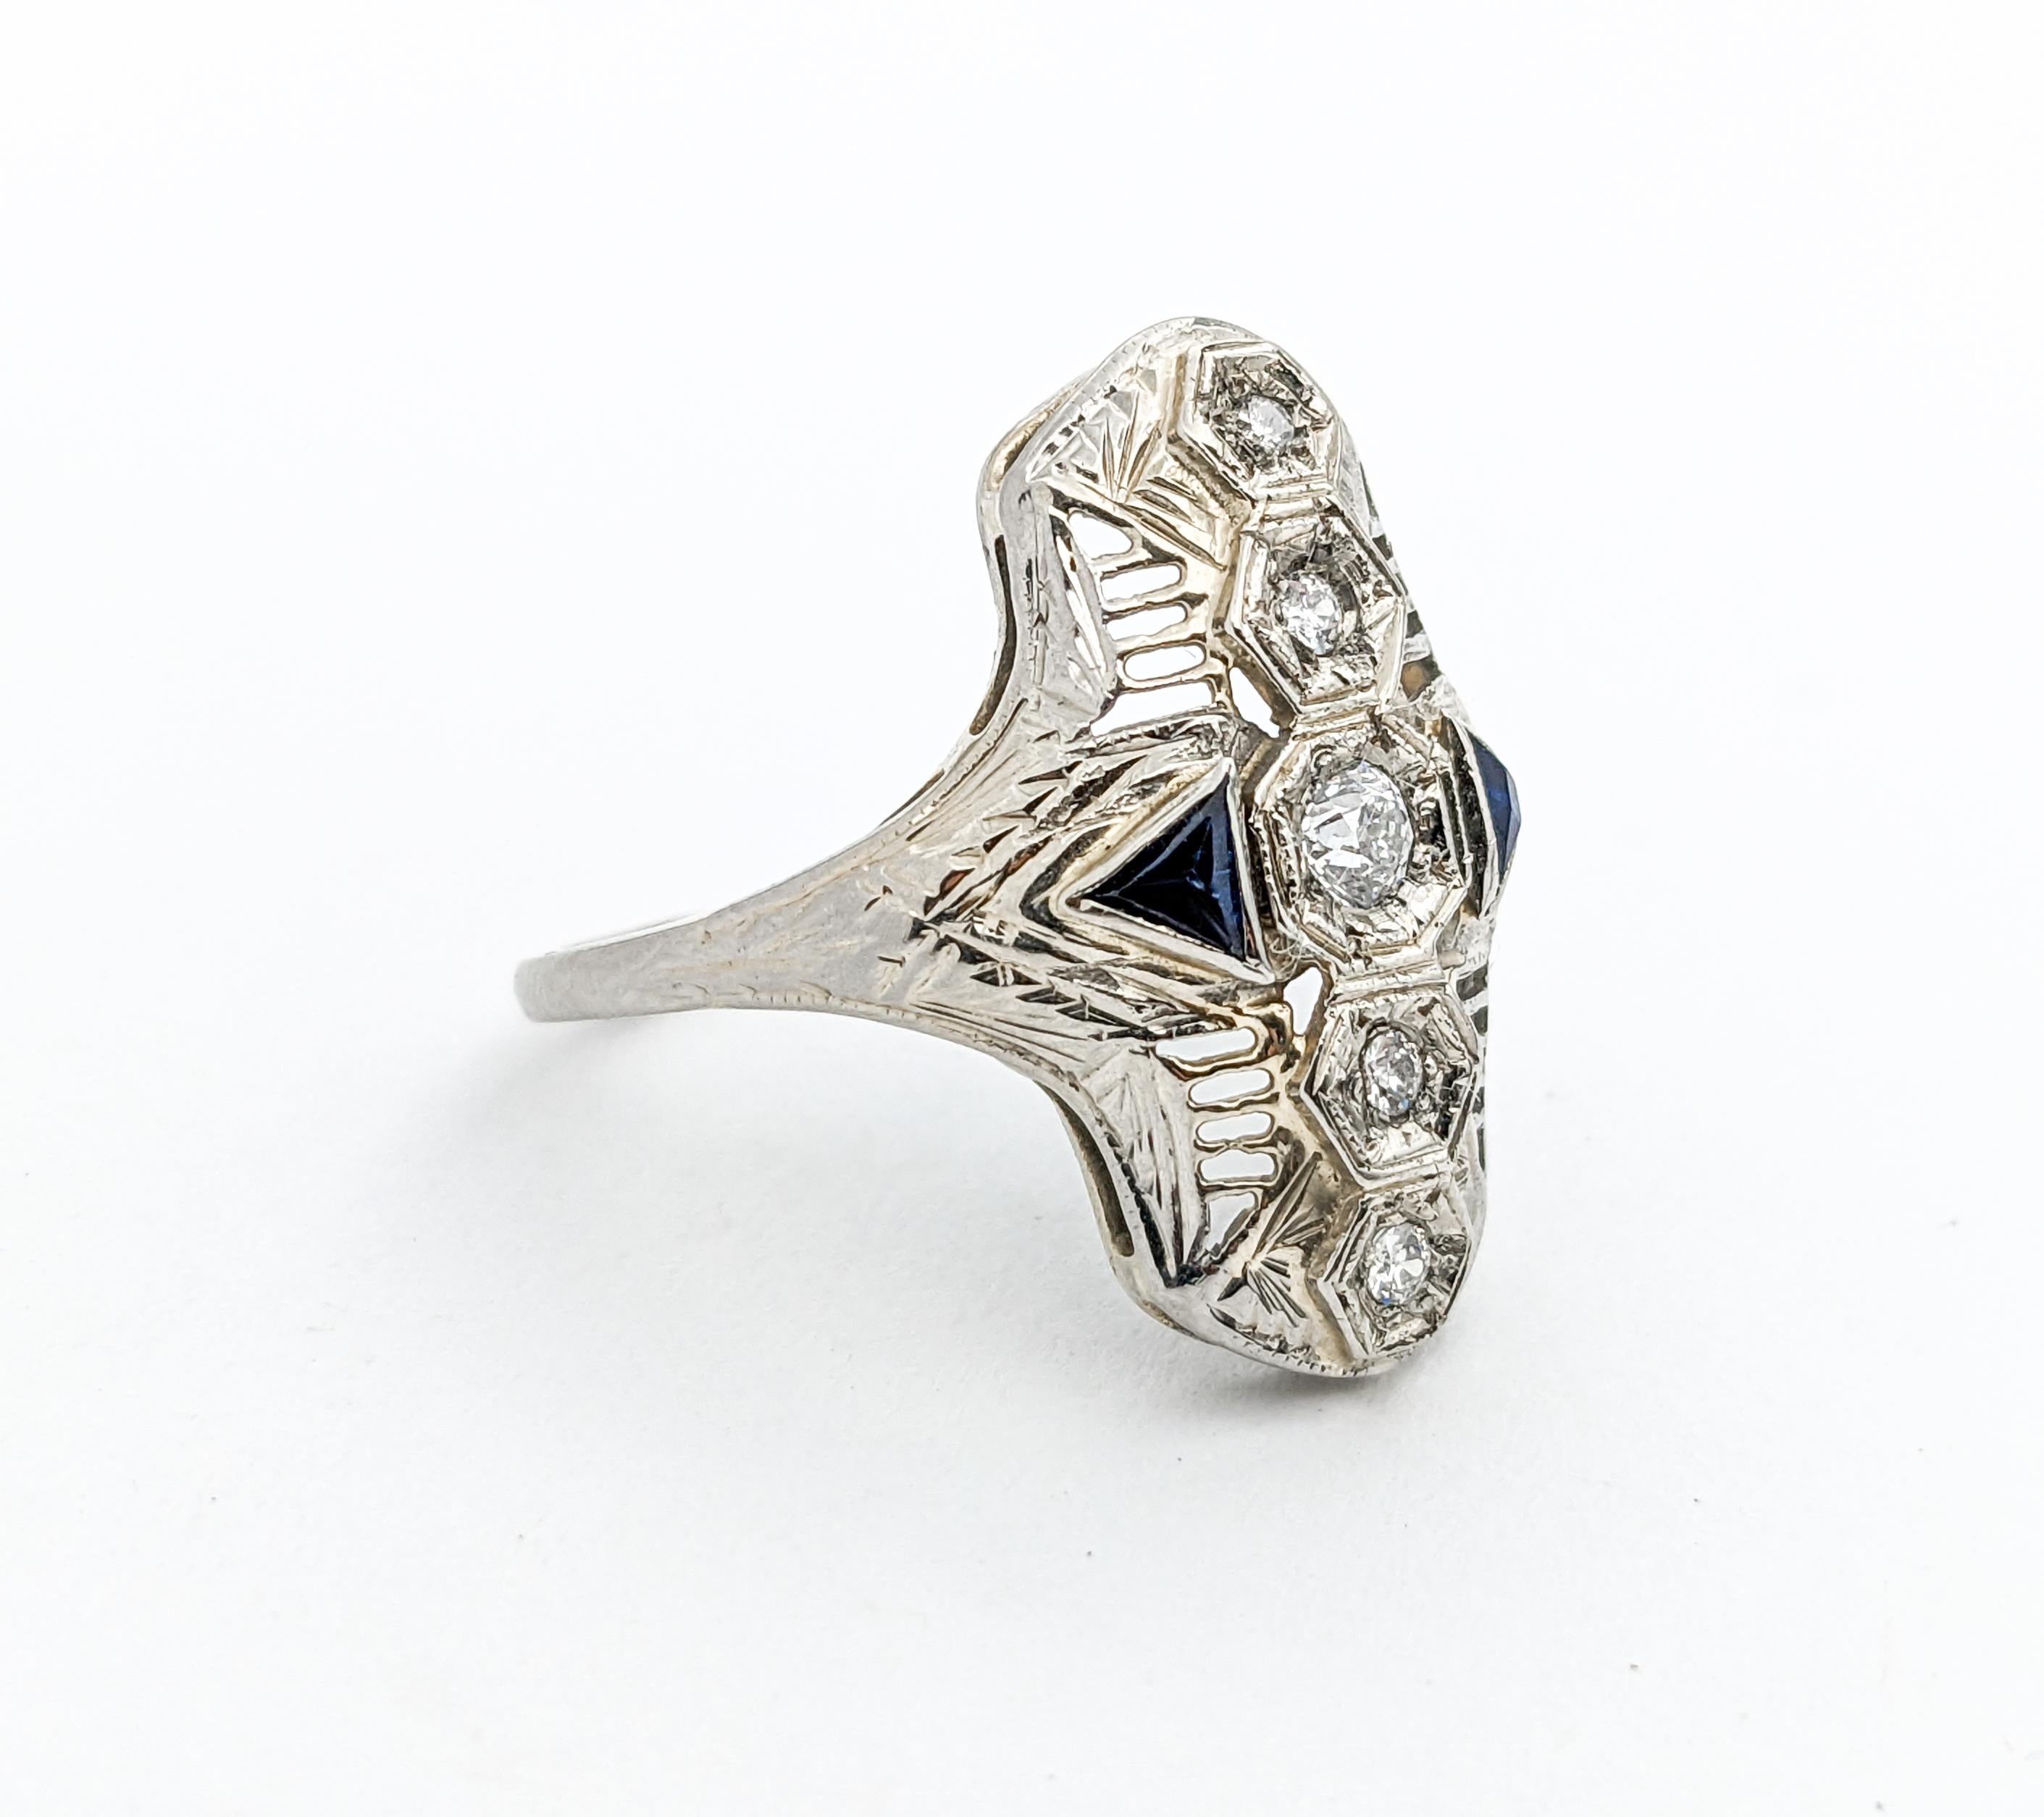 Antique Art Deco Diamond & Sapphire Filigree Shield Ring In White Gold

Introducing this stunning Art Deco diamond ring, exquisitely crafted in 18k white gold. This piece is a true testament to the timeless allure of Art Deco design, characterized